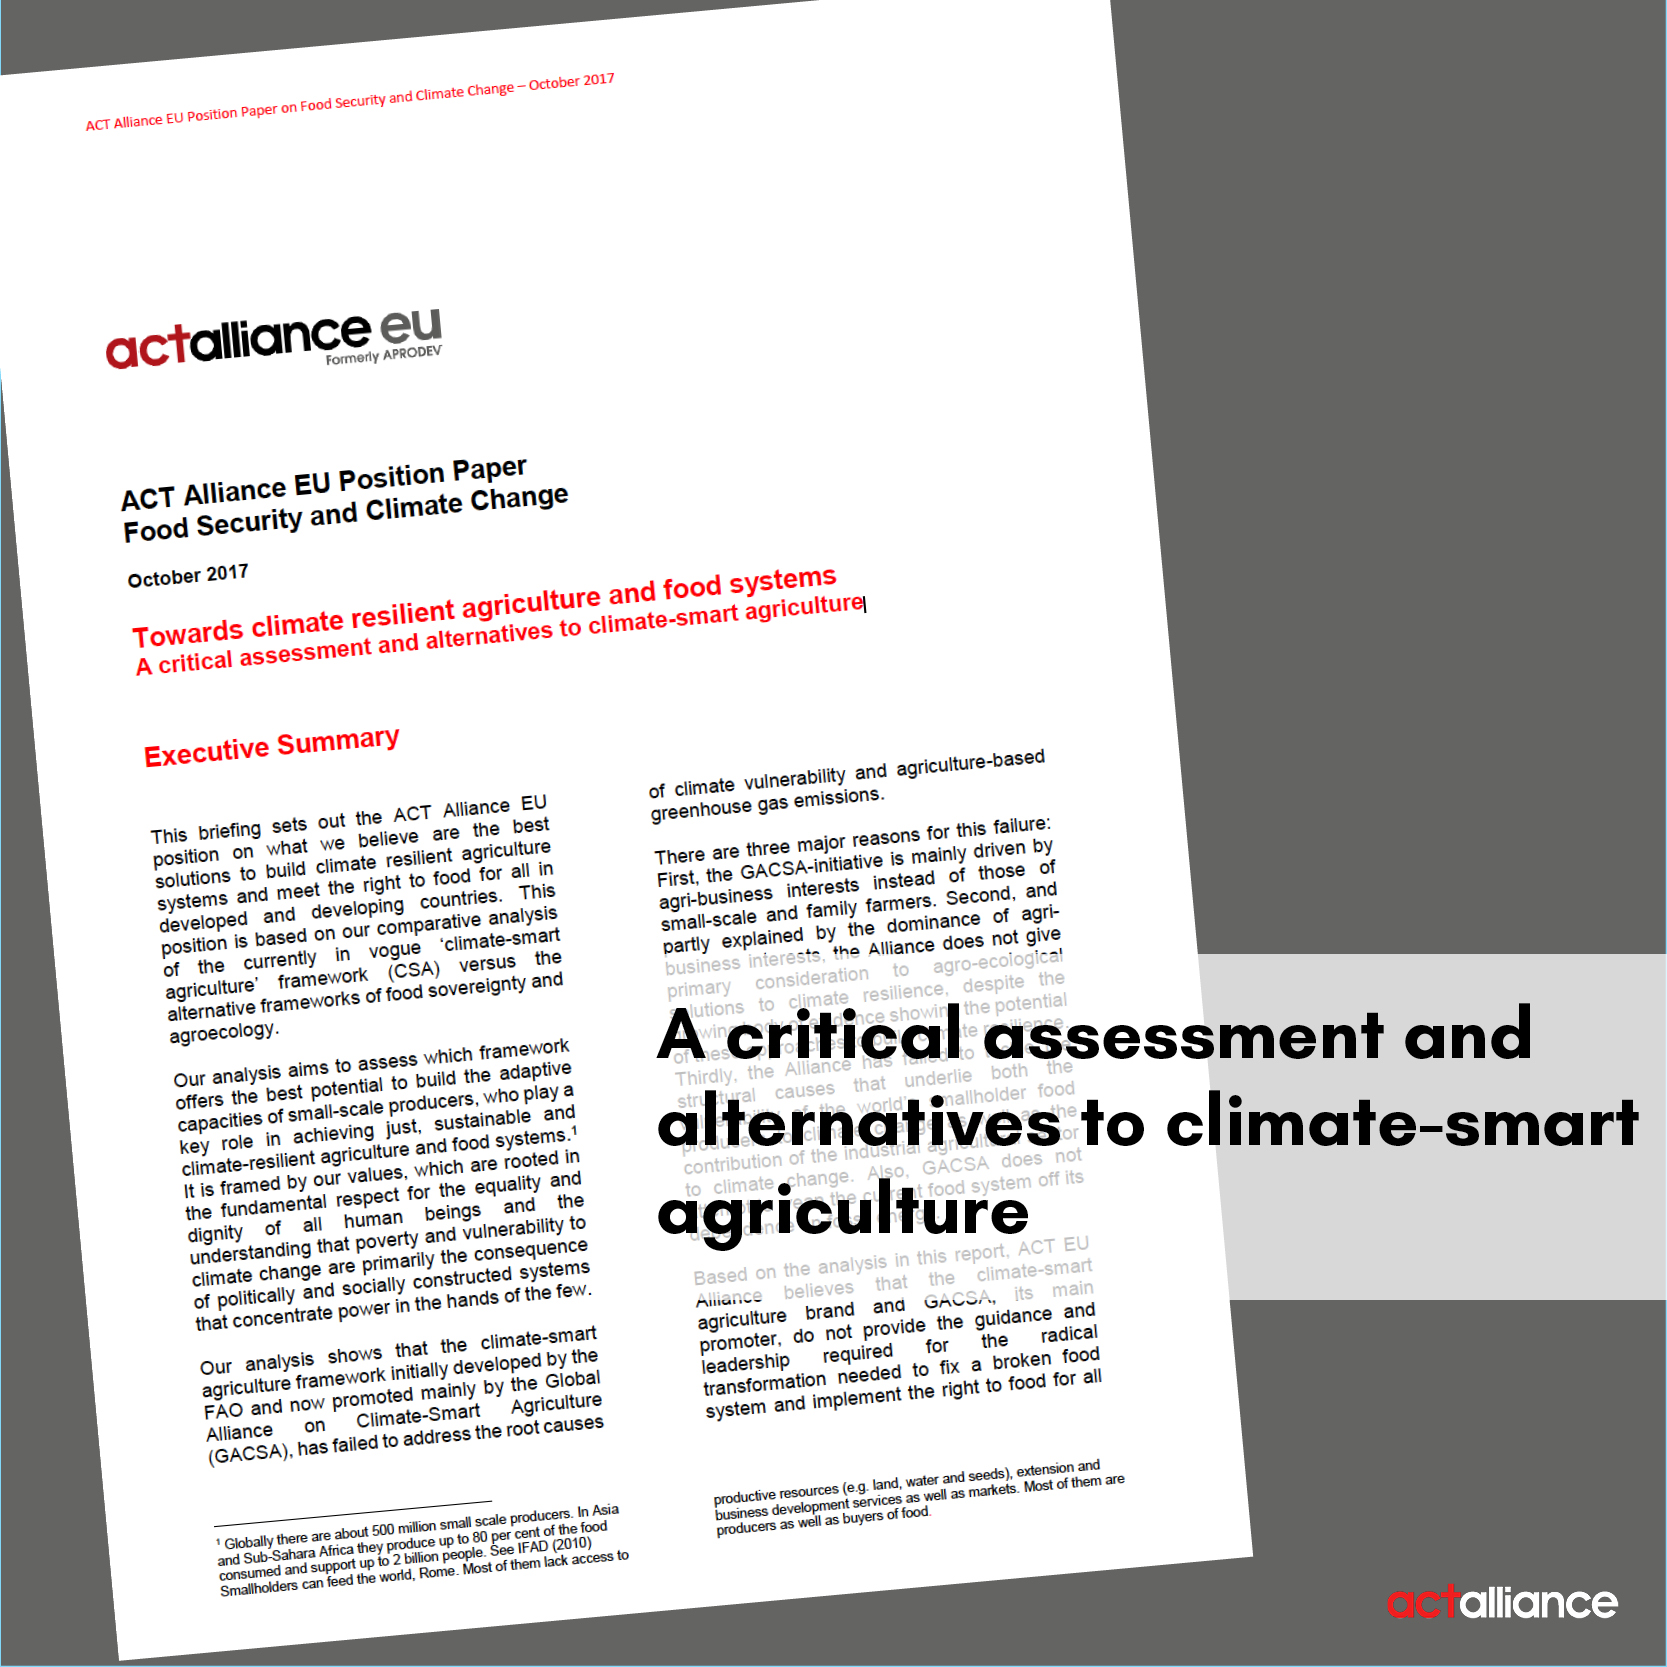 ACT Alliance EU Position Paper on Food Security and Climate Change